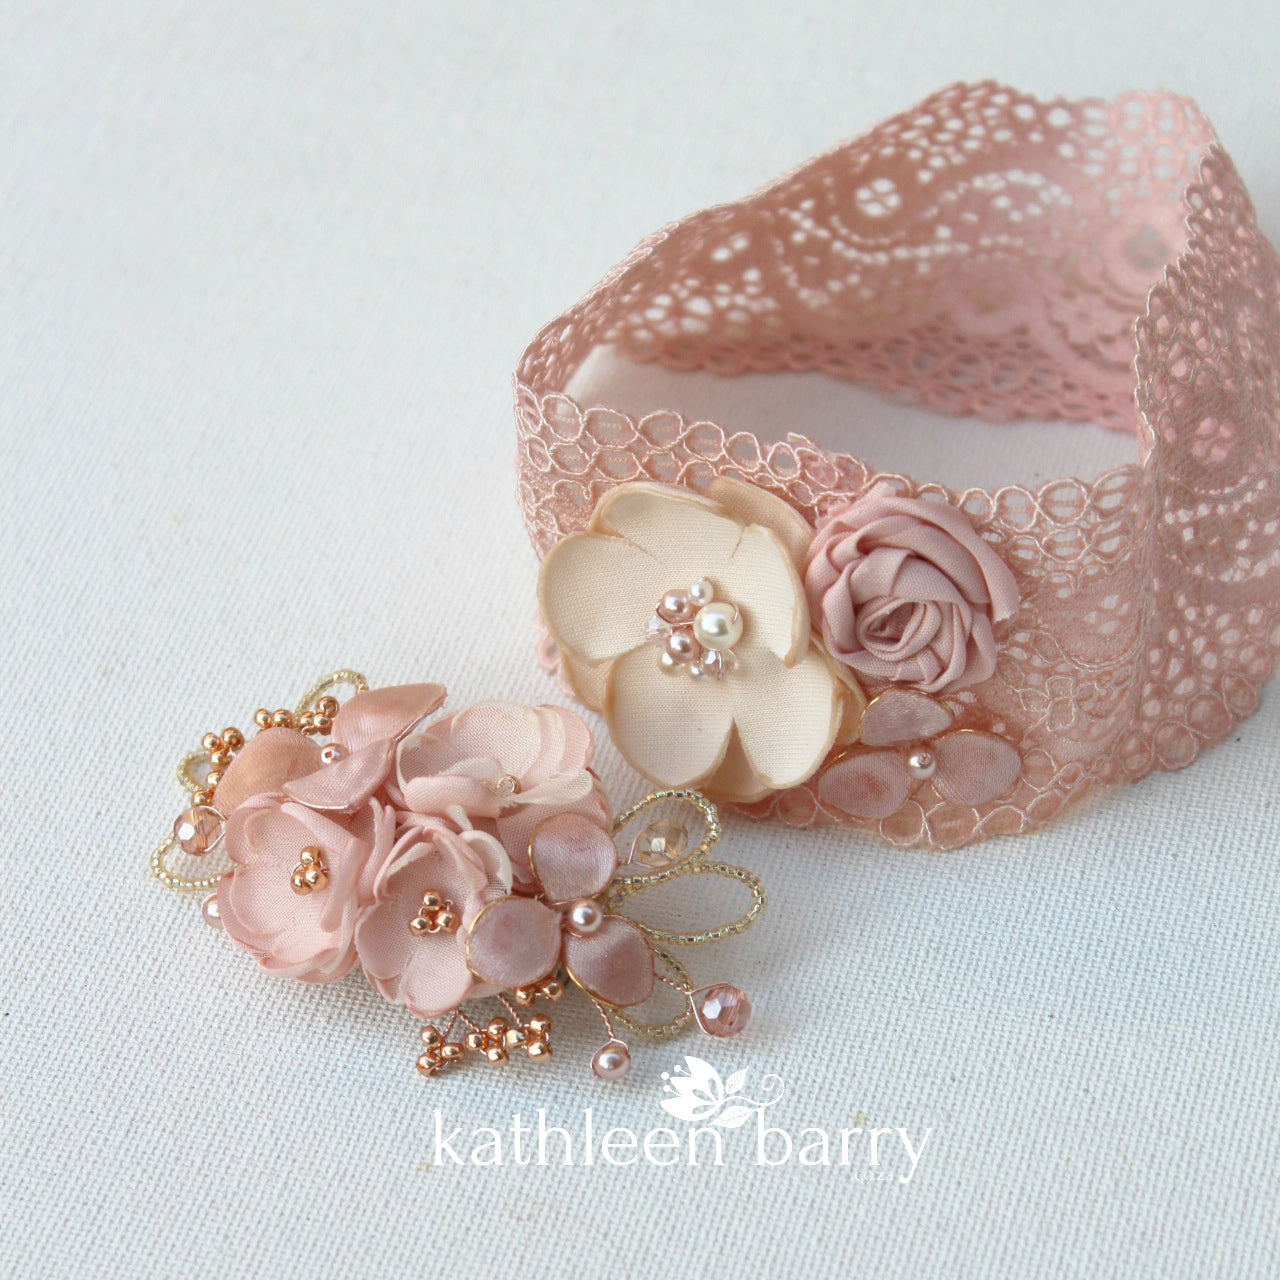 Mini Rose gold blush pink hair clip or mix and match color variations - clip attachment